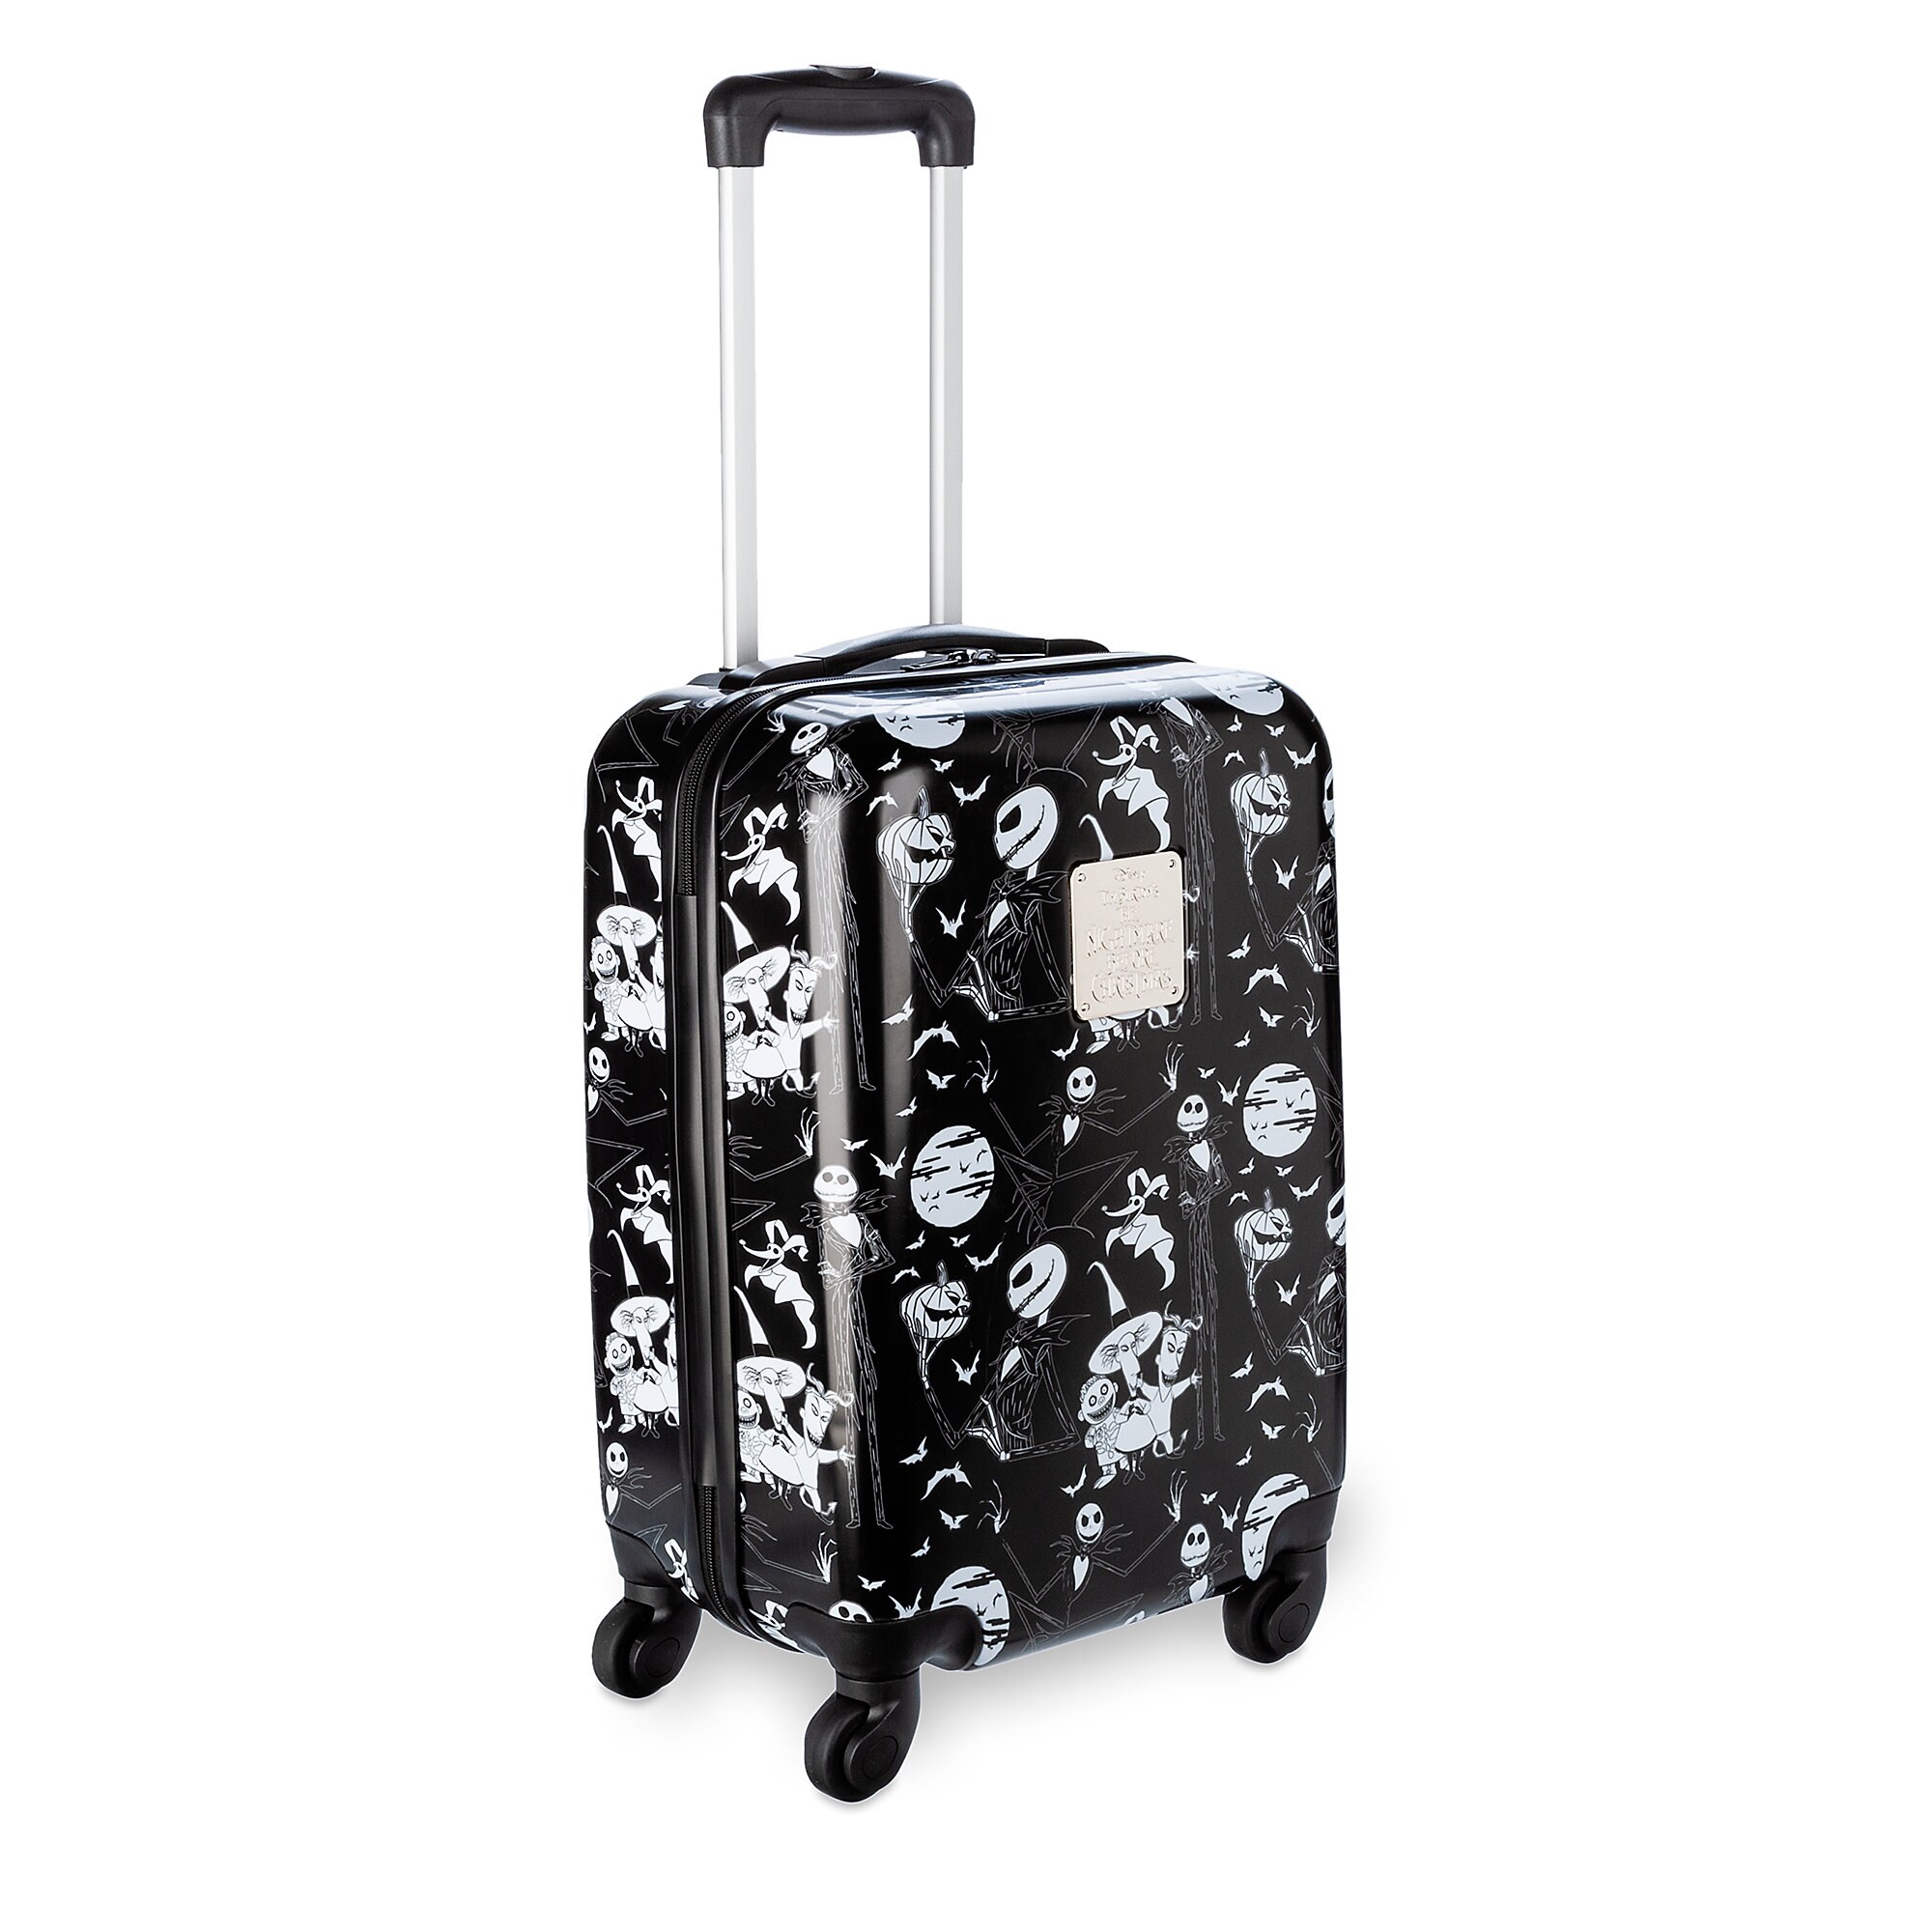 The Nightmare Before Christmas Rolling Luggage - Small